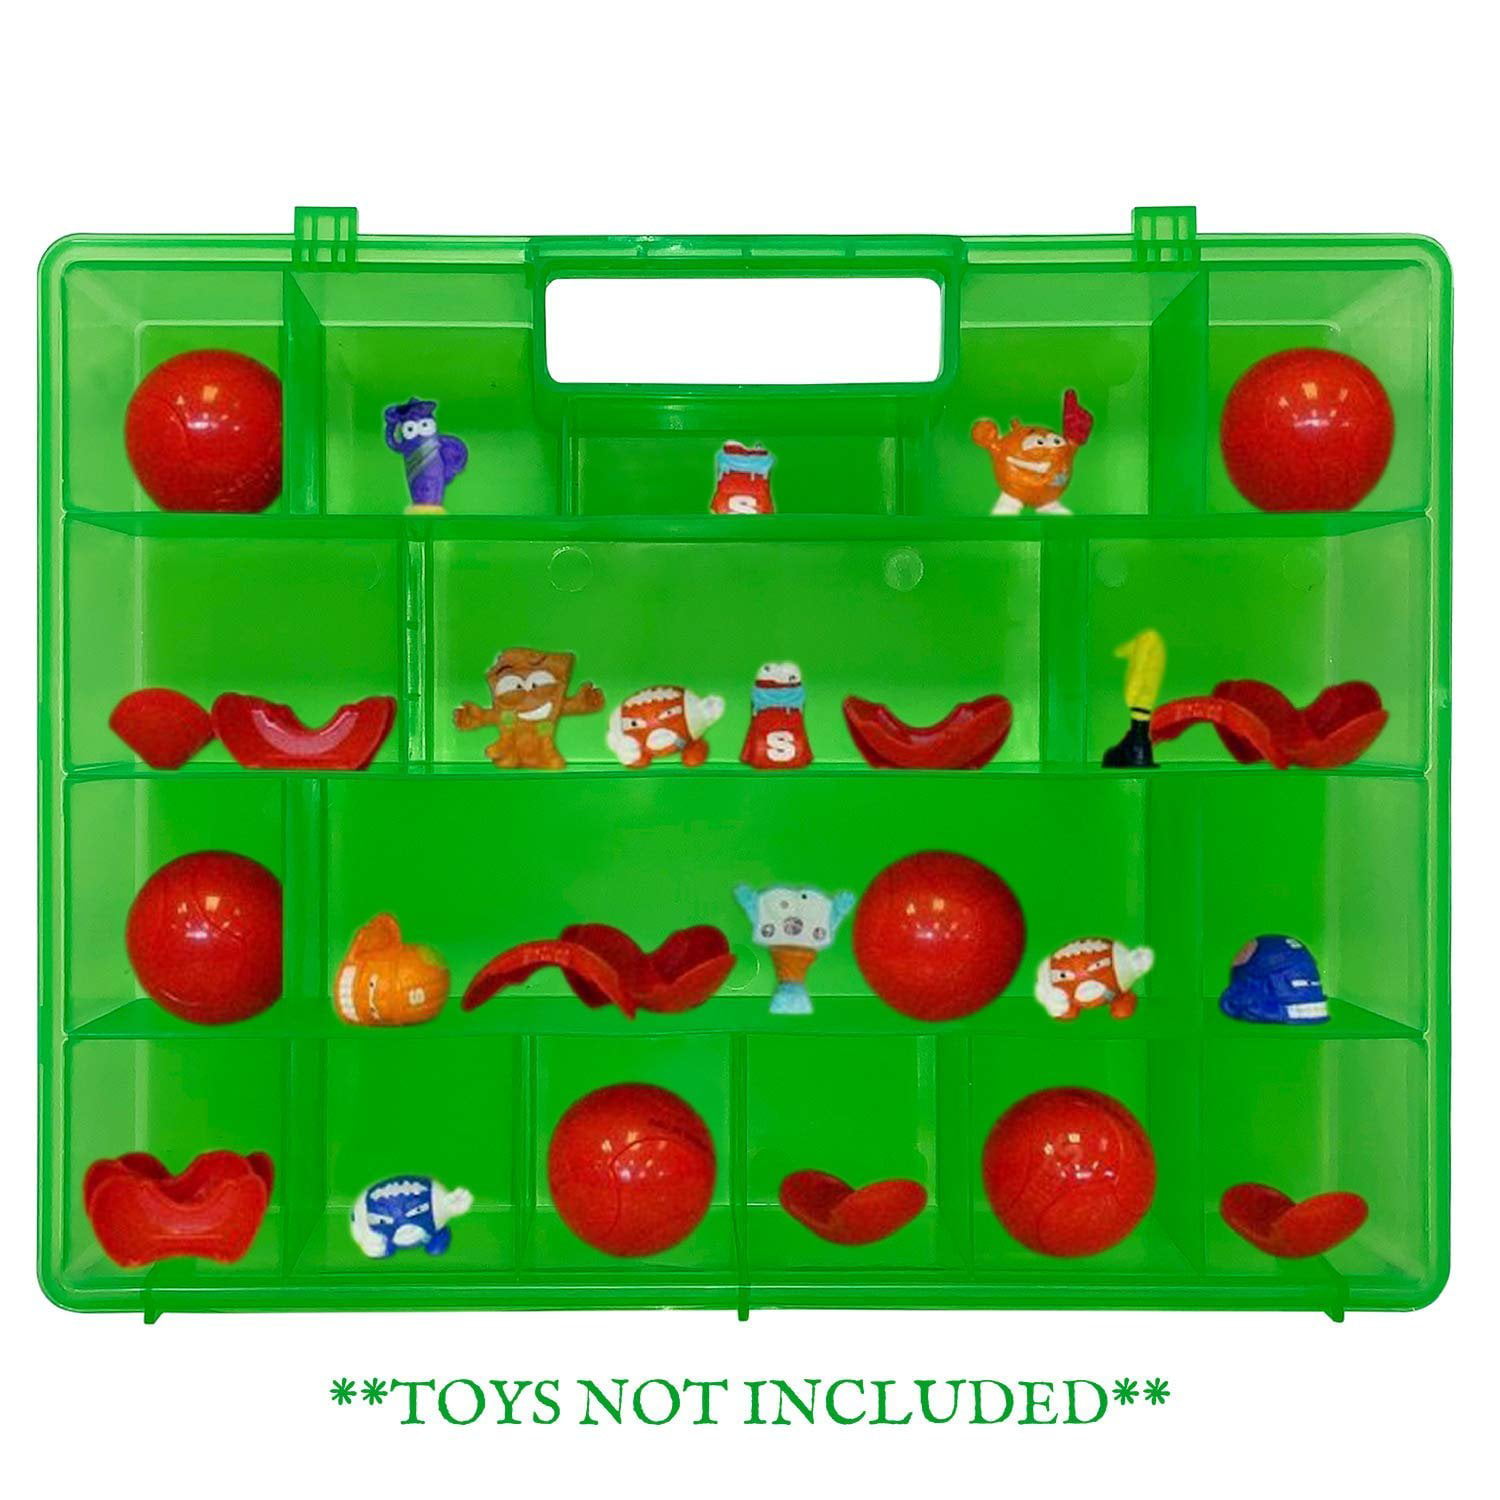 Toy Accessory Case Made by LMB Life Made Better Red Portable Display & Protector Storage Box with Solid Cover and Clasps Works with Zuru Smashers